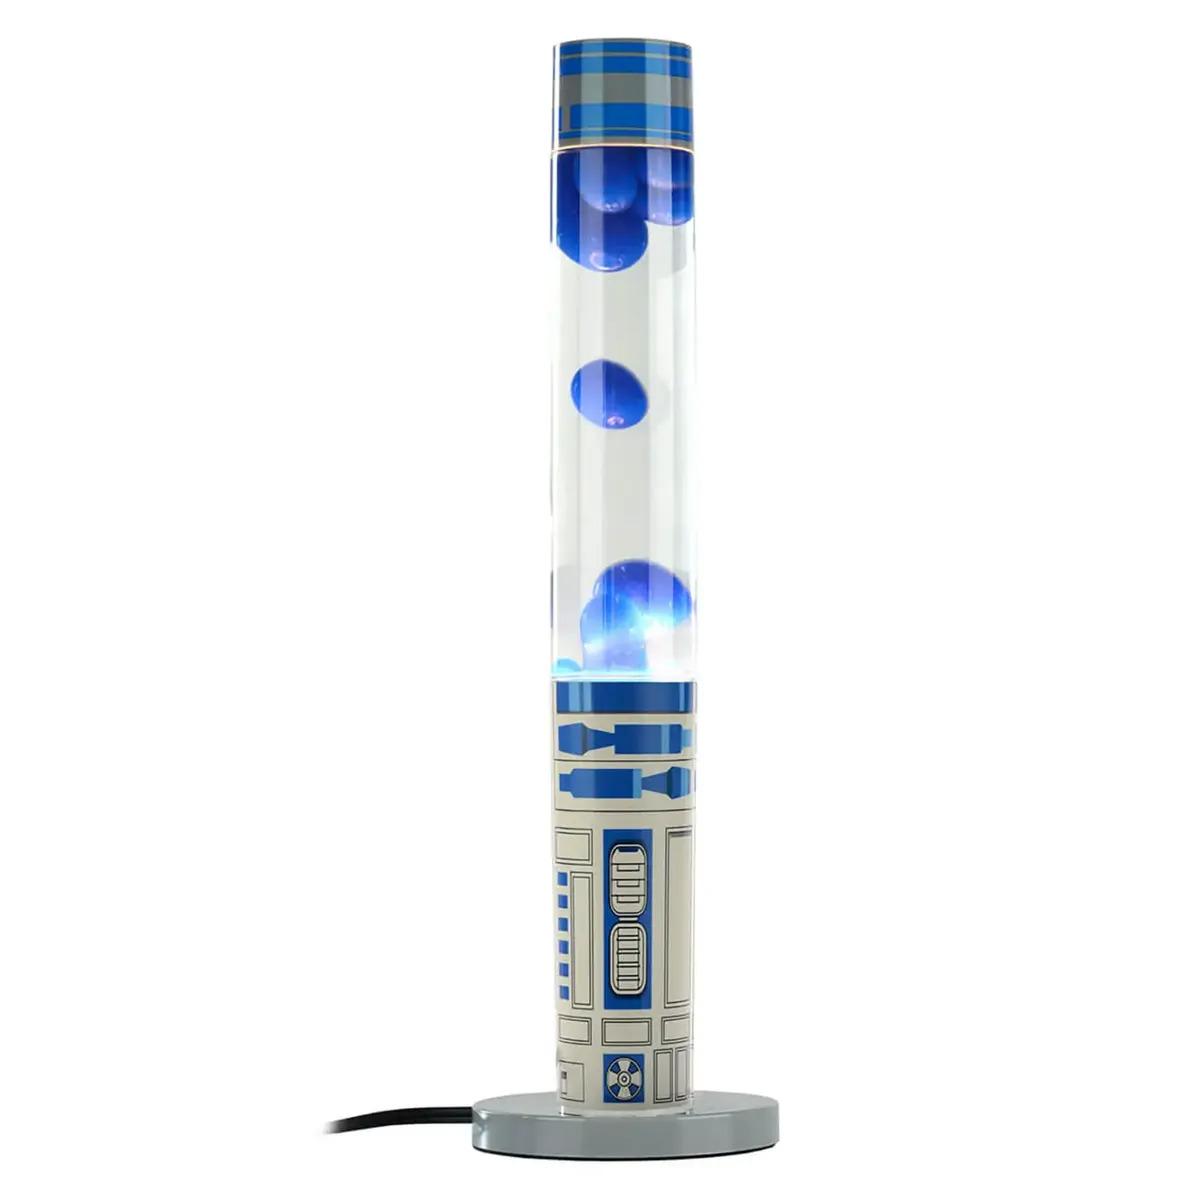 Star Wars R2-D2 Motion Lava Lamp for $19.99 Shipped